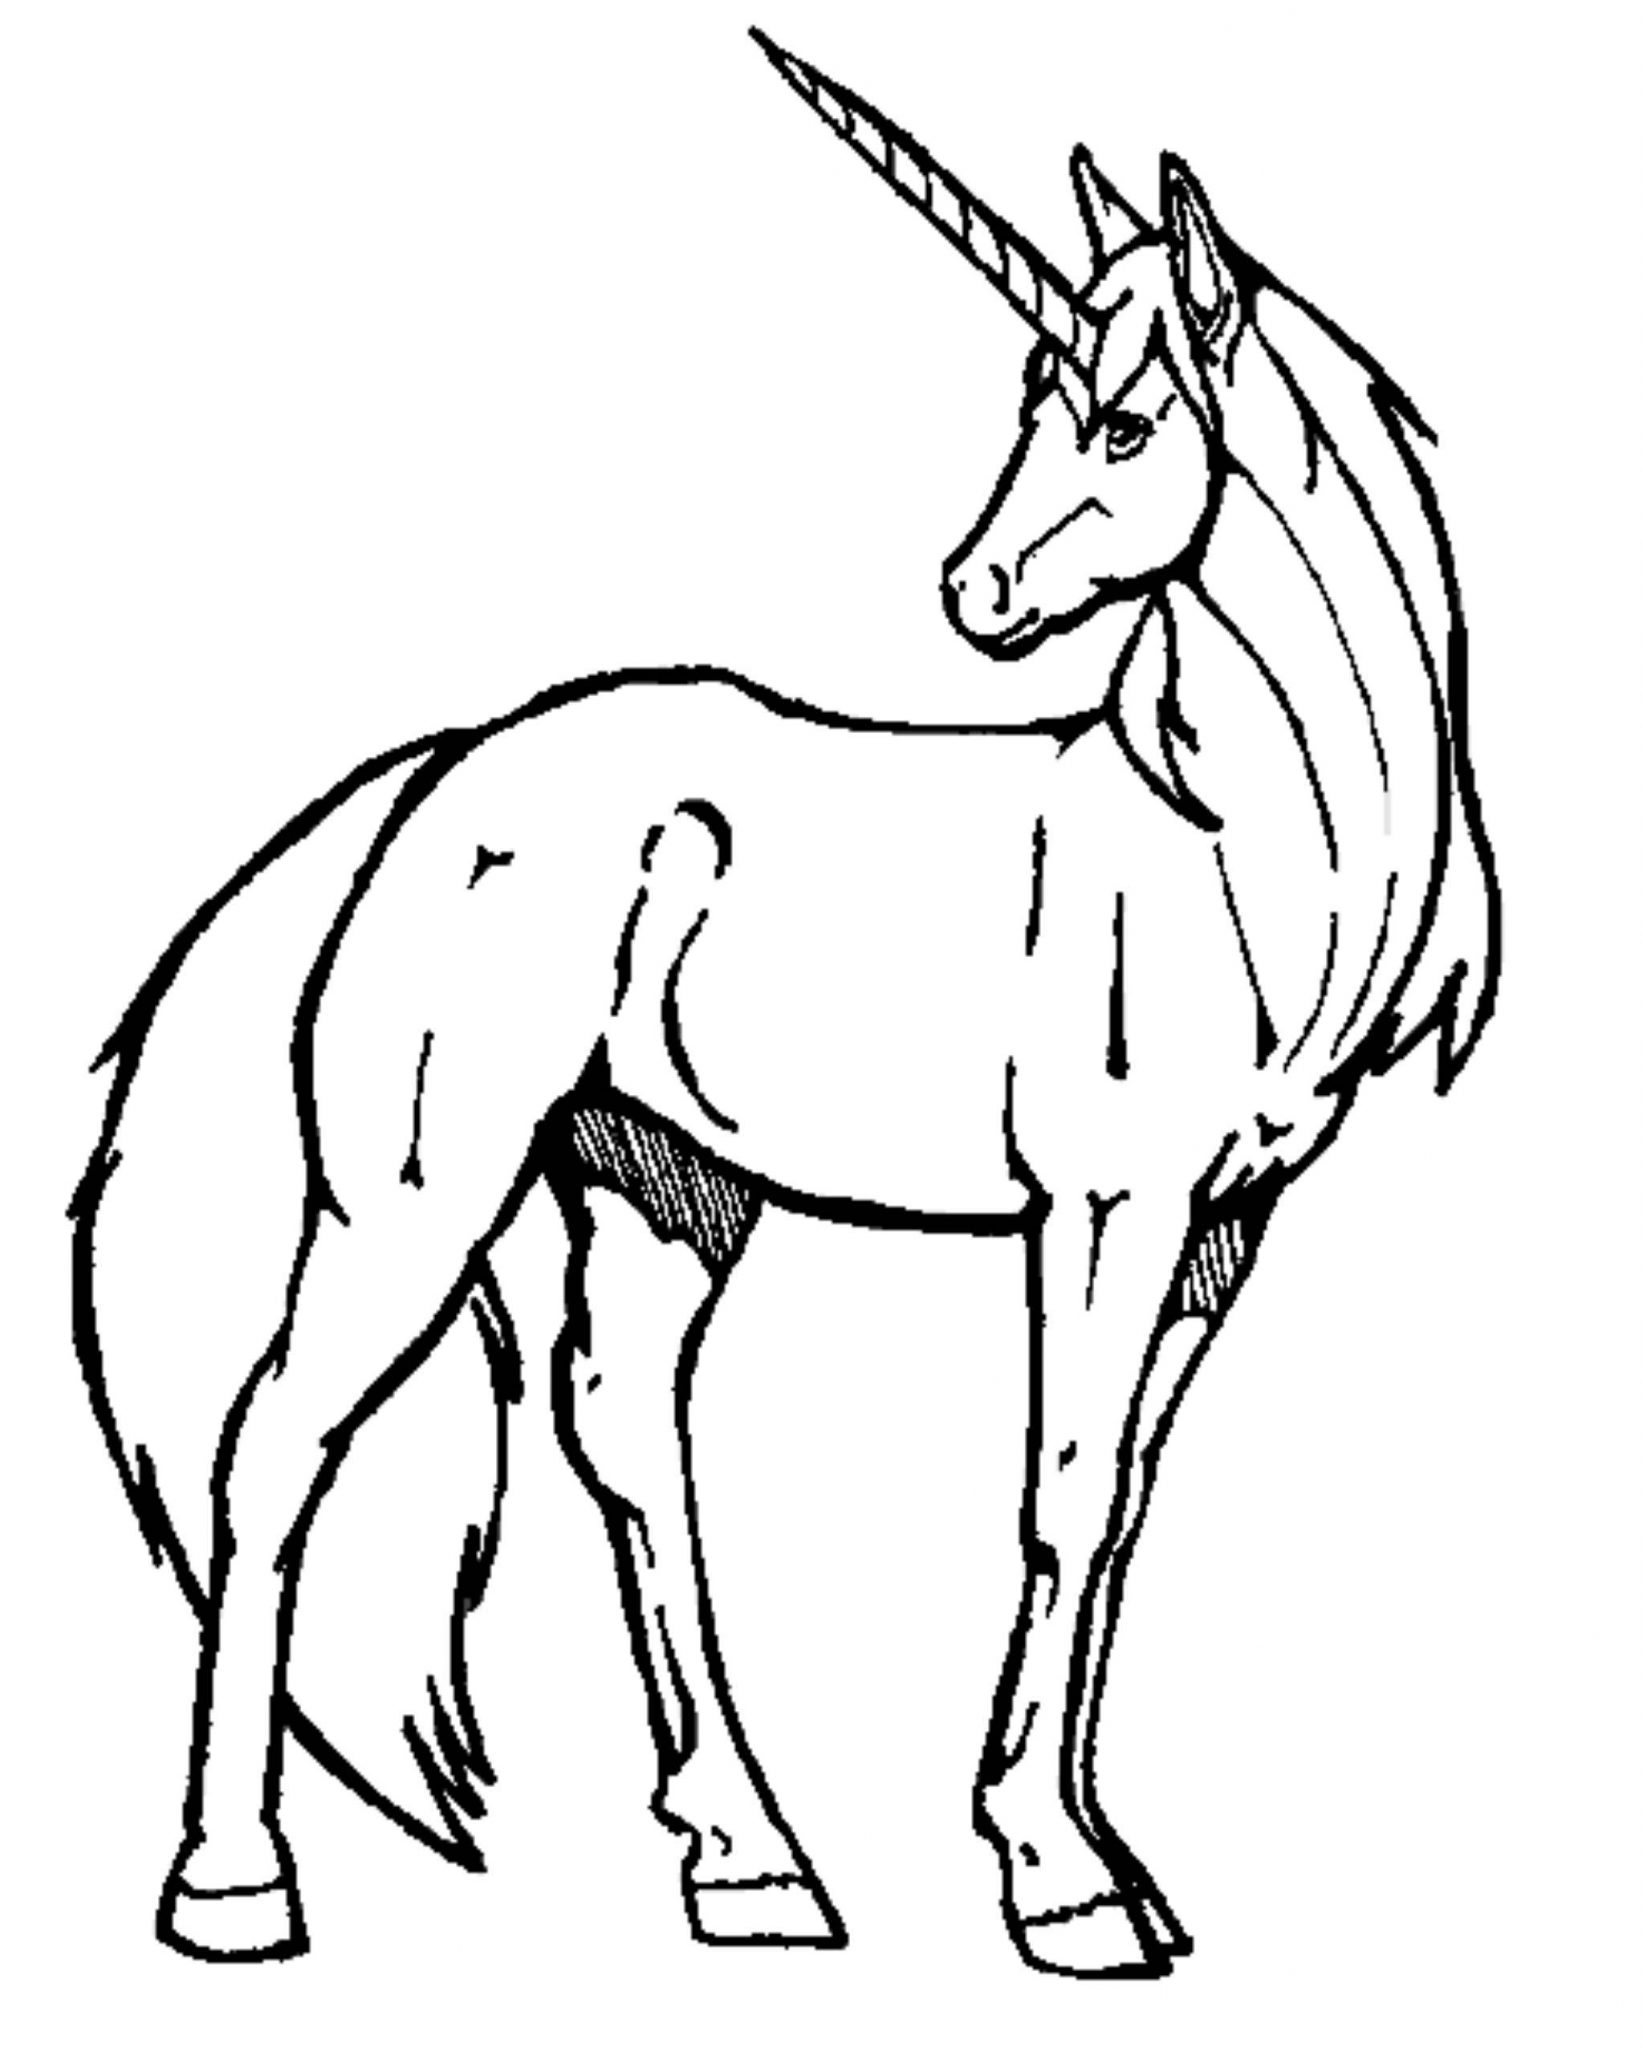 unicorn-easy-drawing-at-getdrawings-free-download